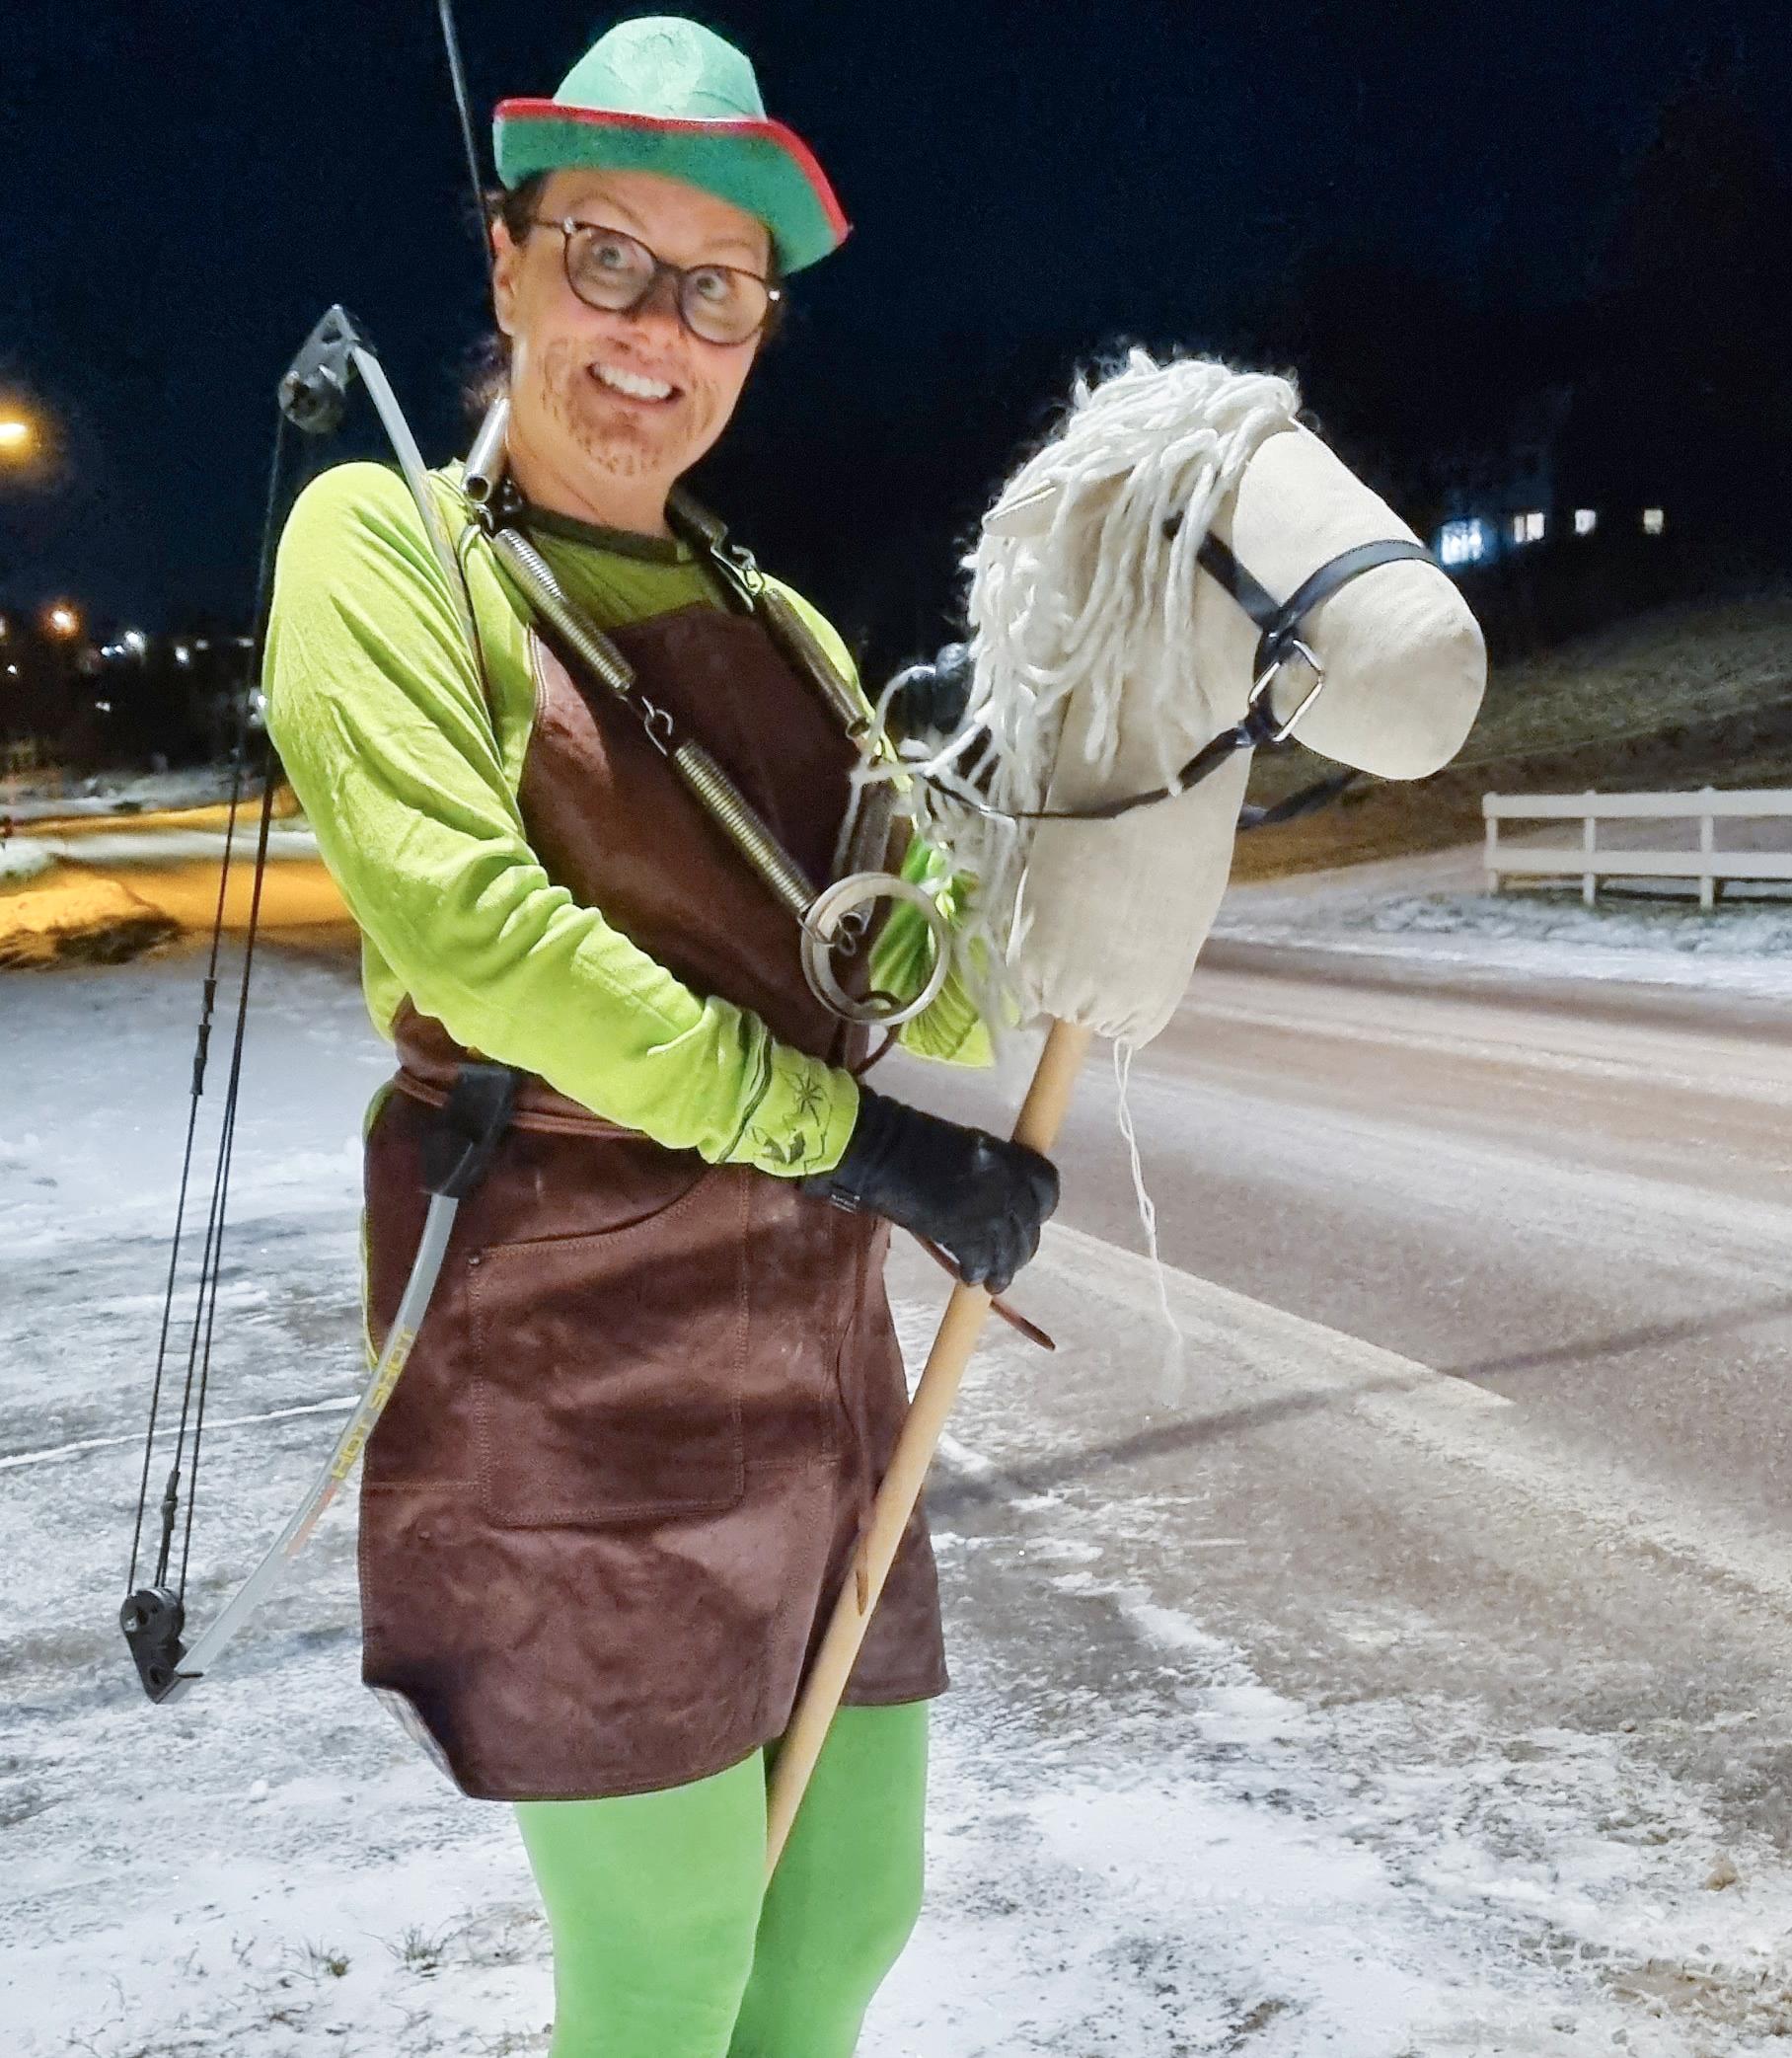 New Stunt: Mayor Robin Ridderseth doesn't get offended, Quanli during Halloween this year 